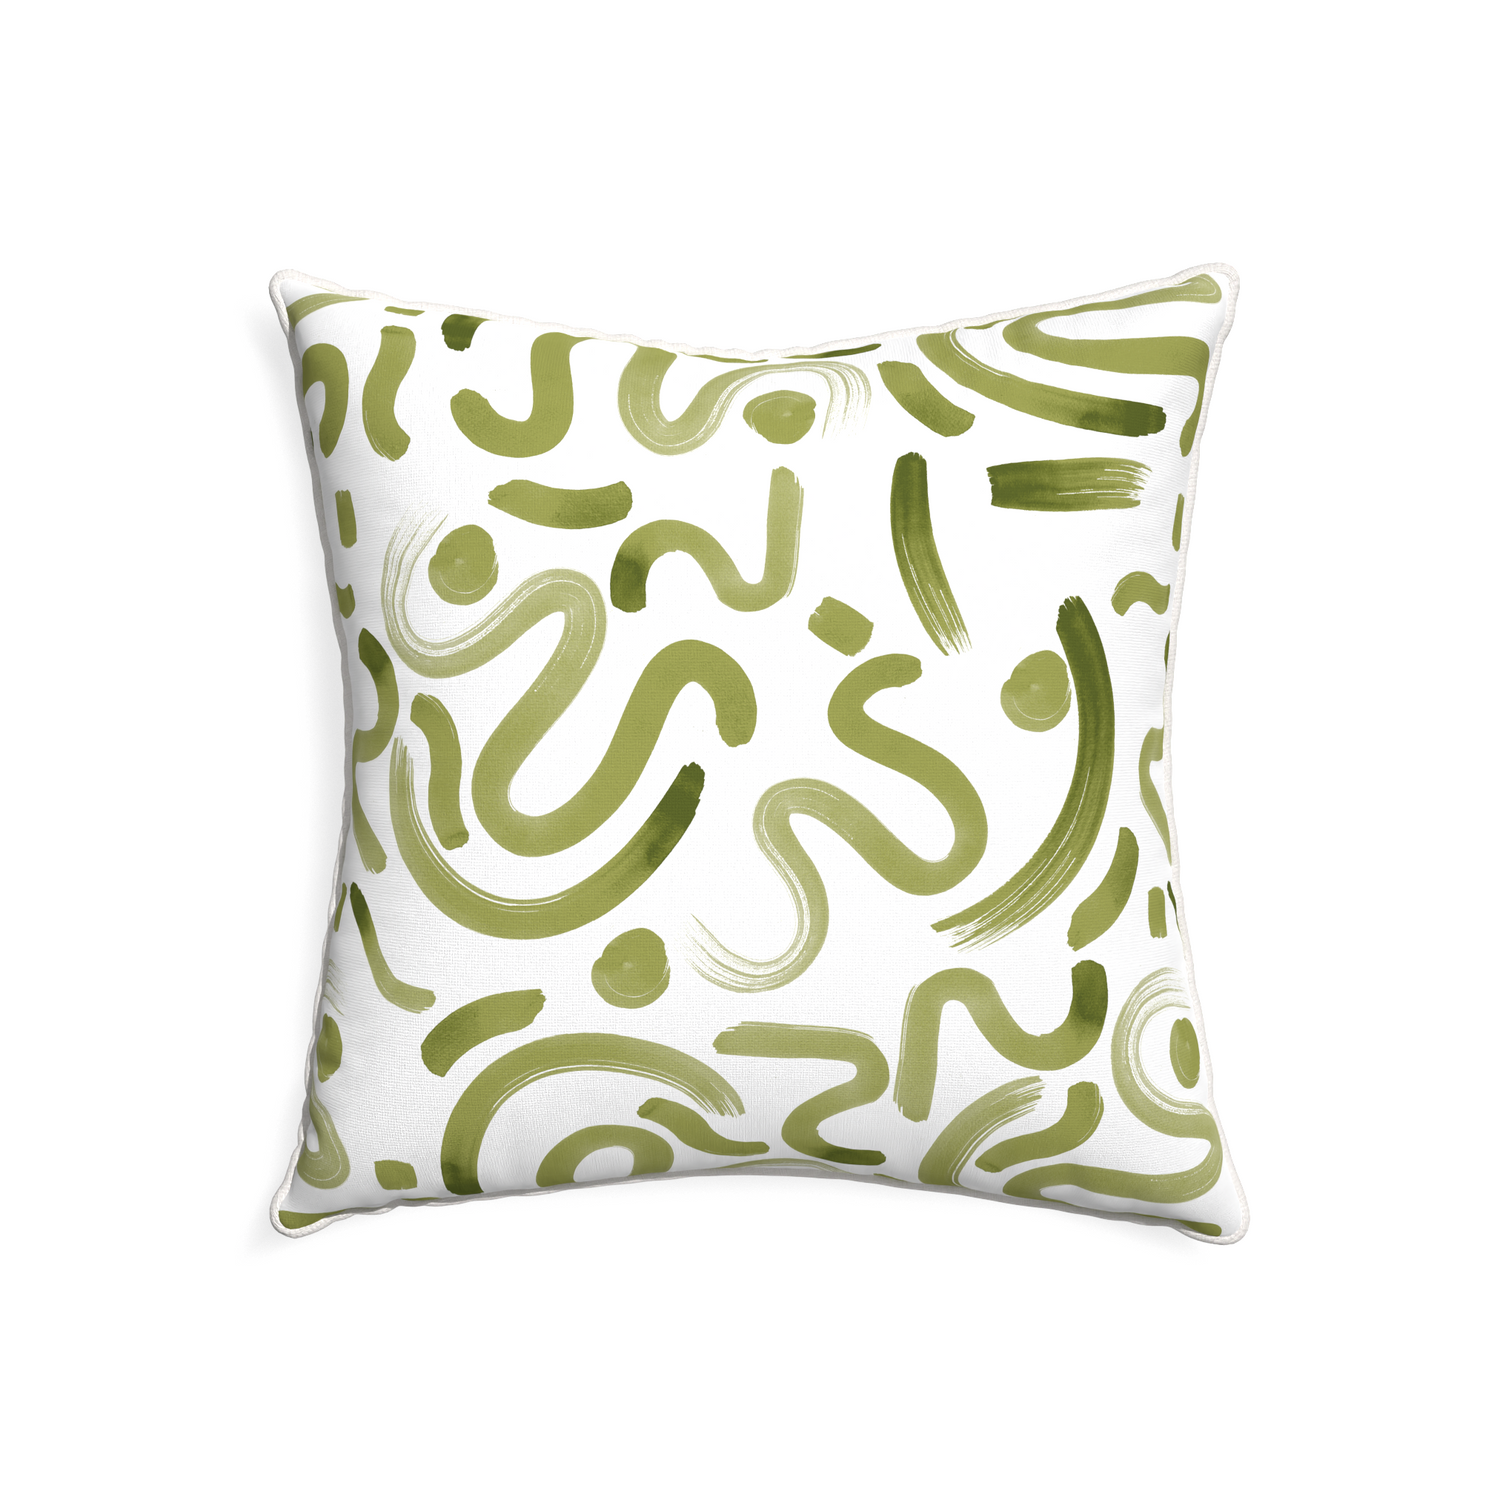 22-square hockney moss custom pillow with snow piping on white background